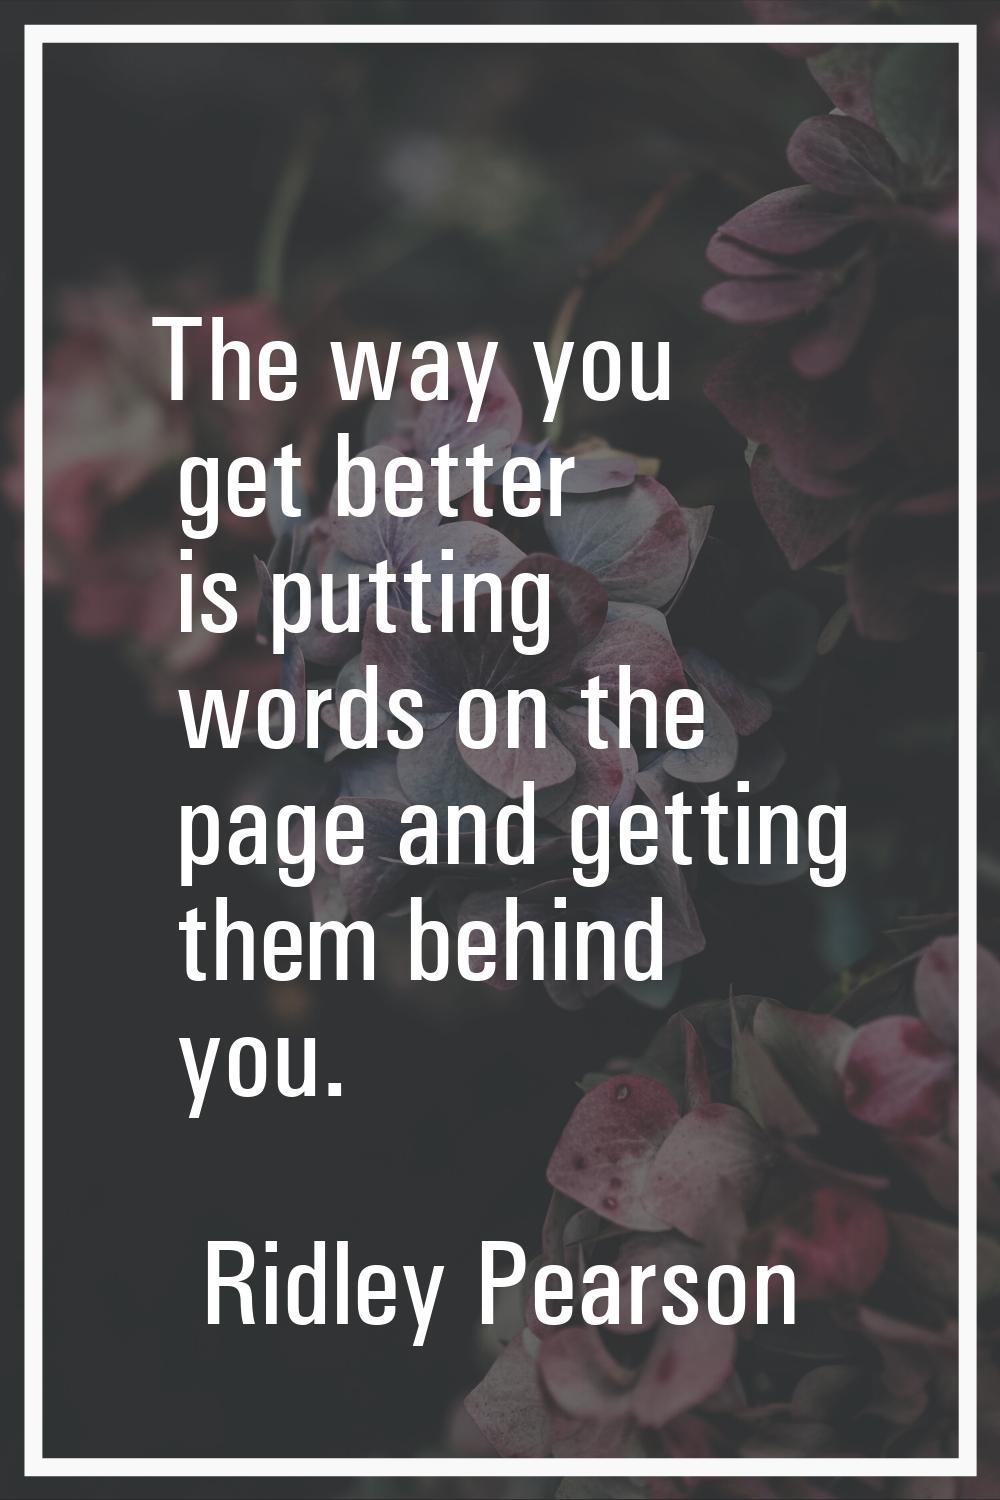 The way you get better is putting words on the page and getting them behind you.